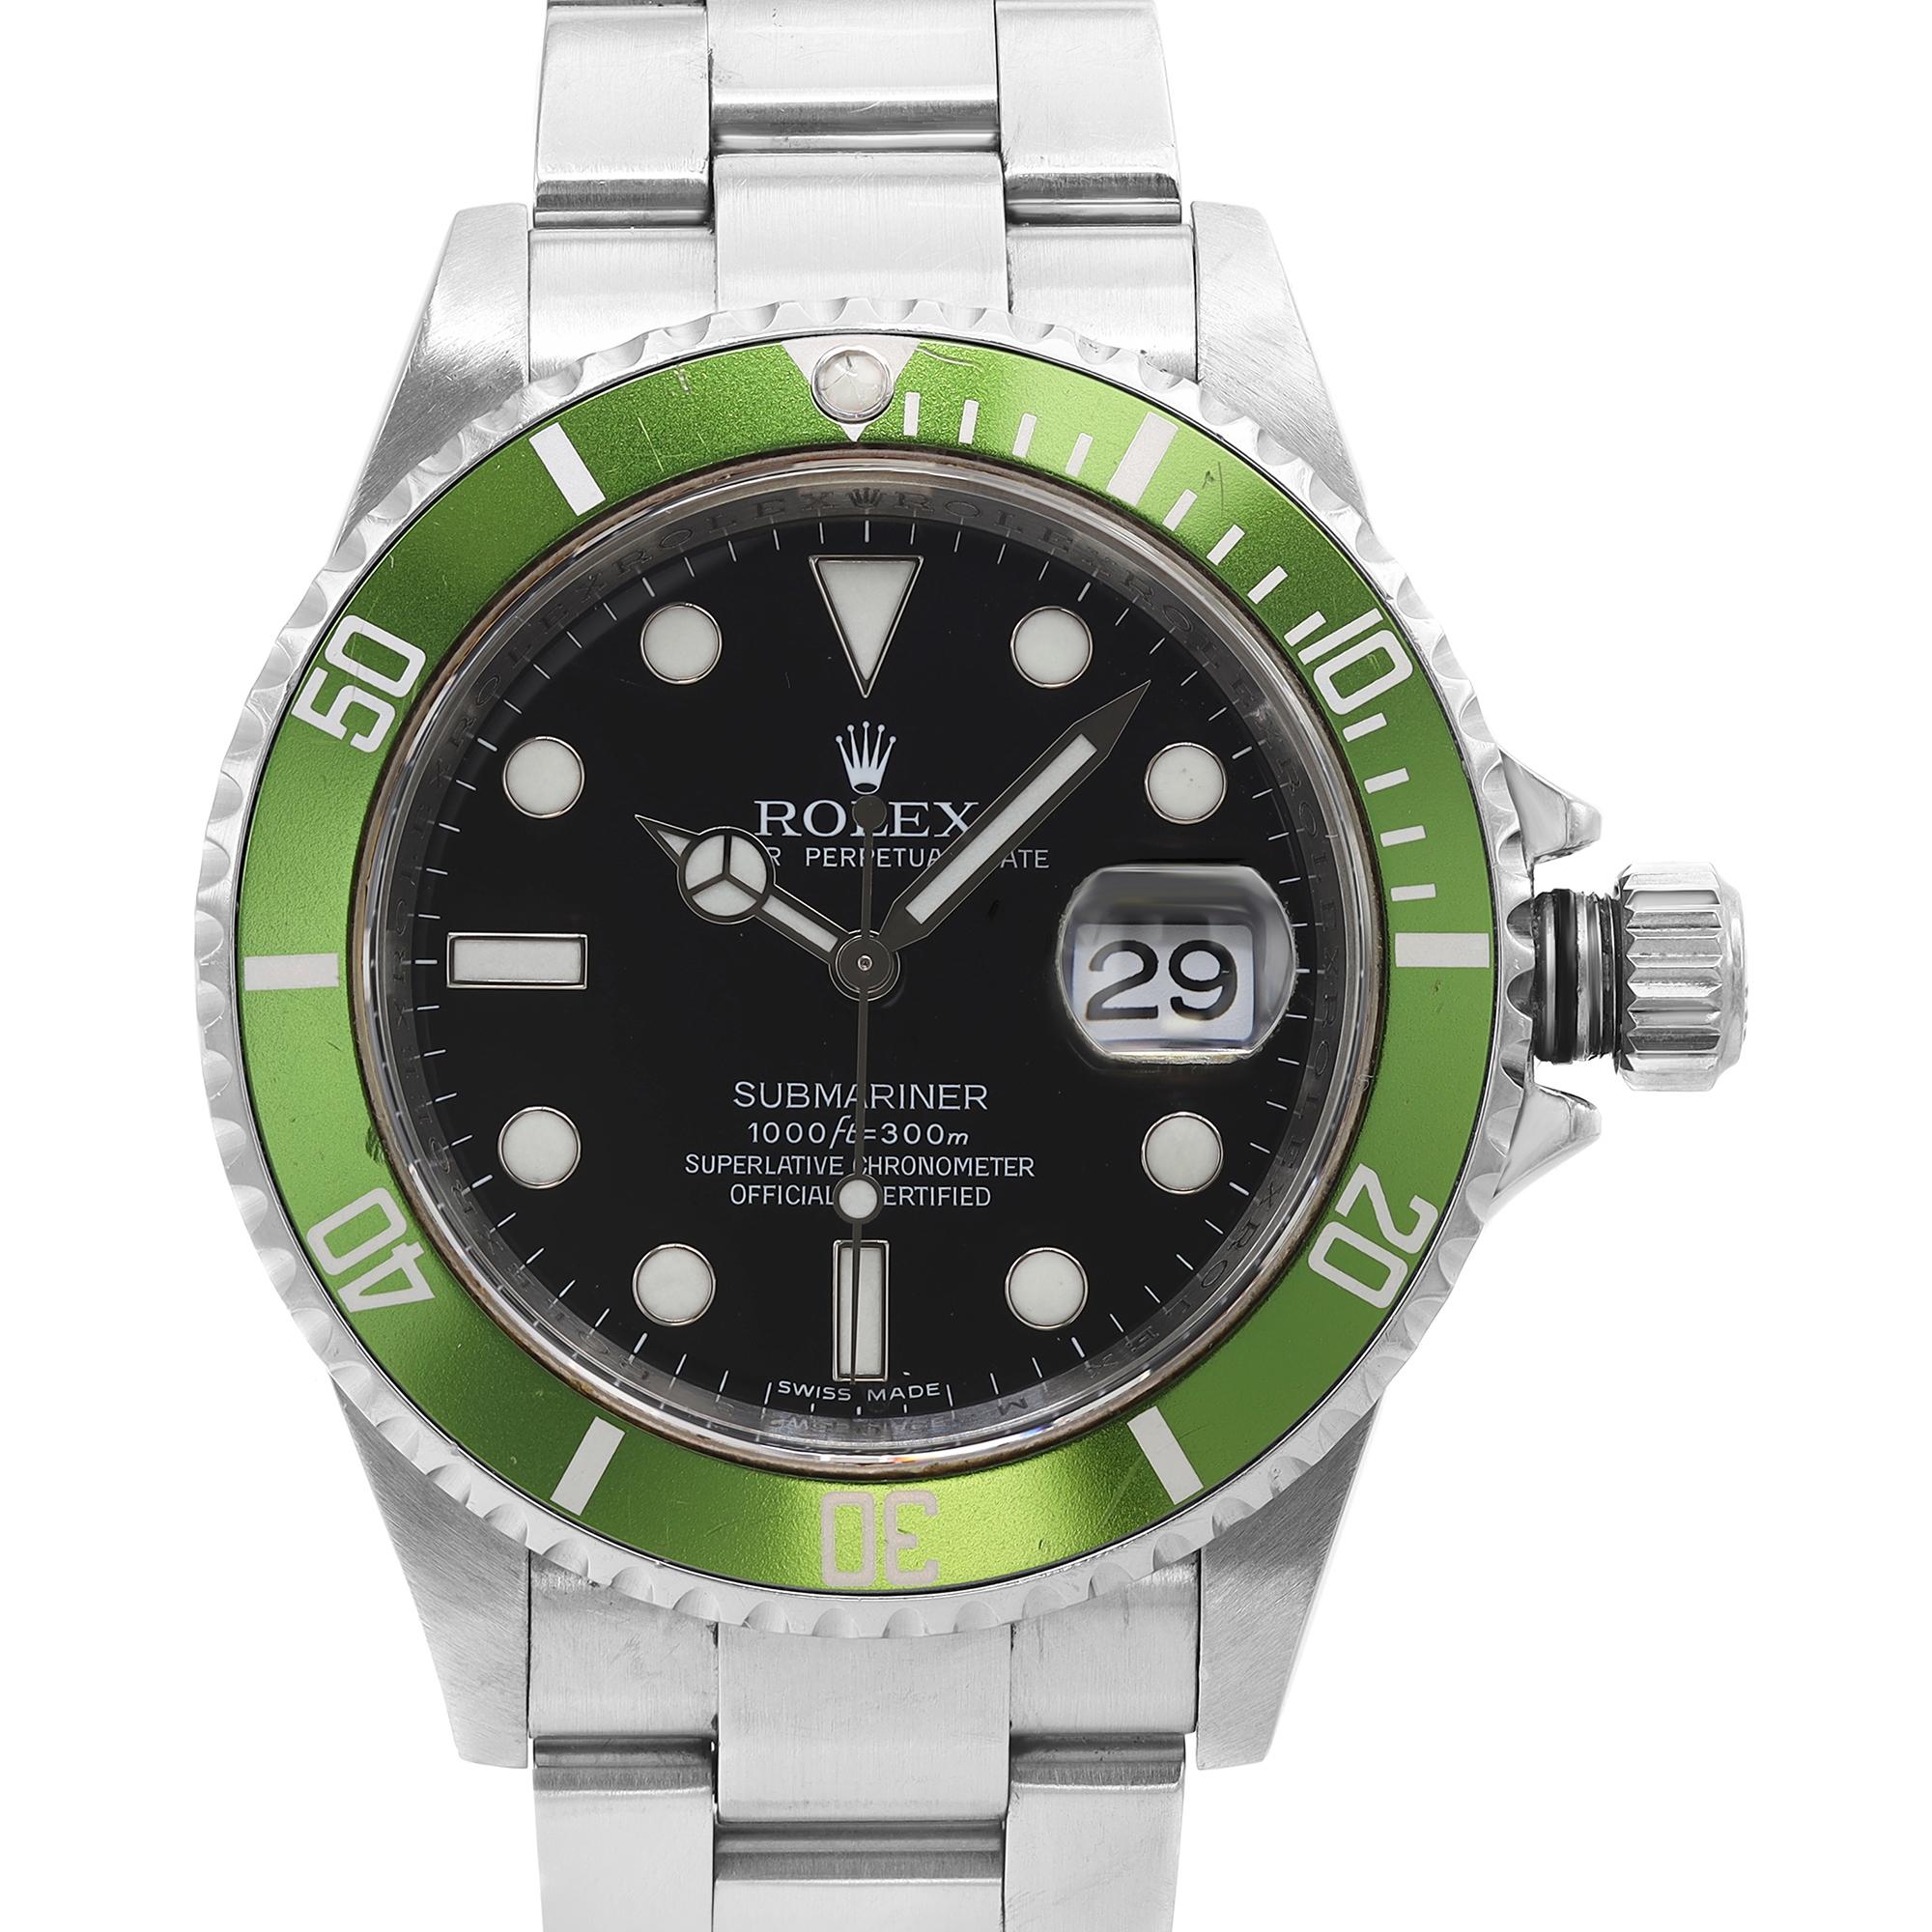 Rolex Submariner Kermit 40mm Stainless steel Black Dial Automatic Men's Watch 16610 T. Minor dings and scratches on the bezel insert. No Original Box and Papers are Included. Covered by 3-year Chronostore Warranty. Worldwide Shipment with a 30-day